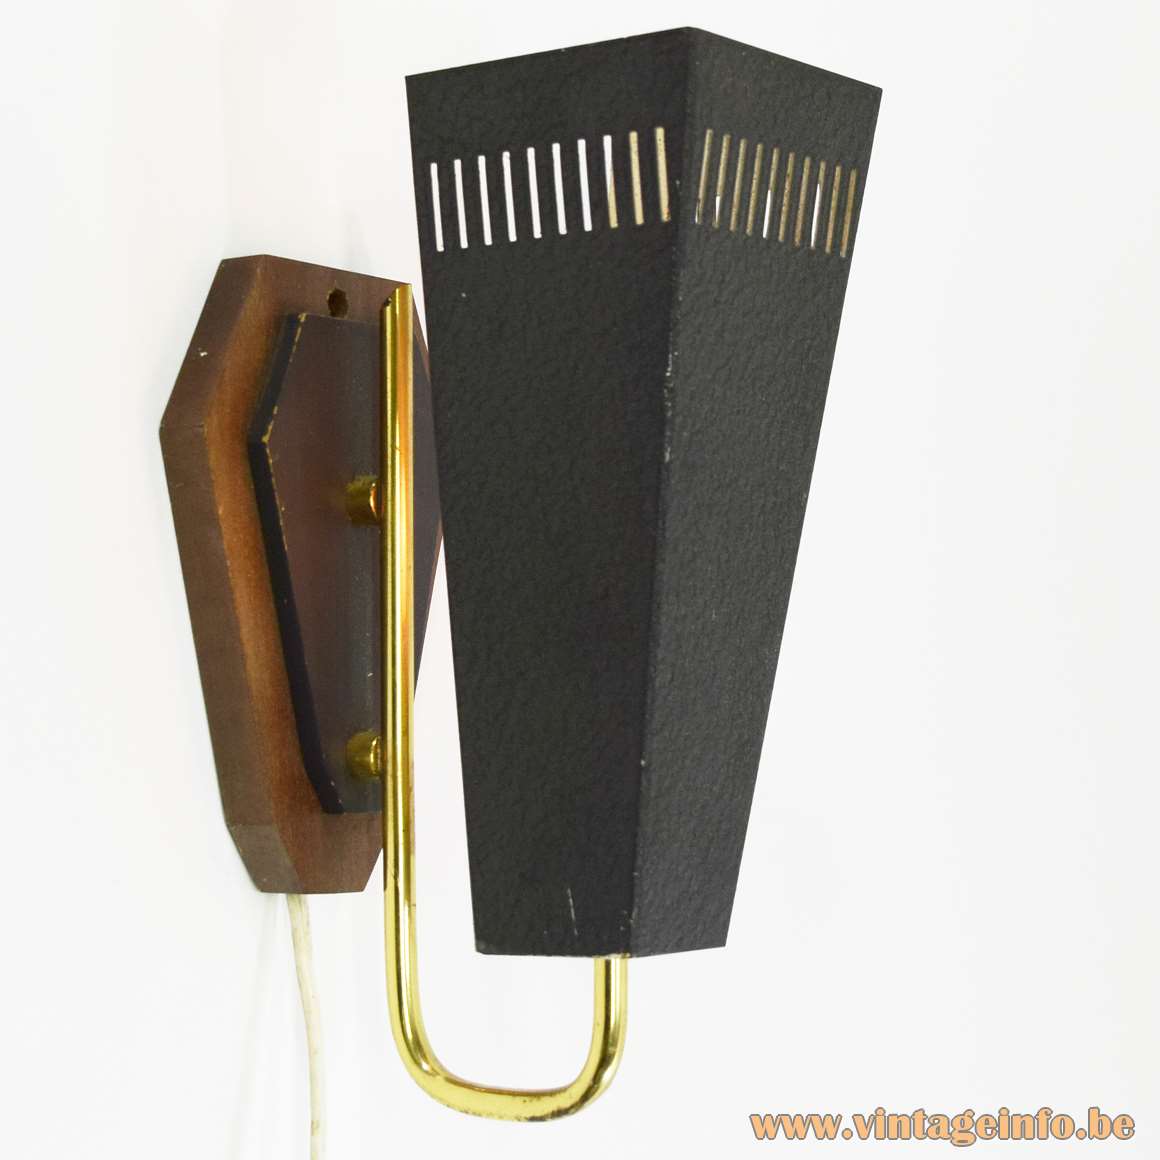 1950s Trapezium Wall Lamp black wrinkle paint brass curved rod wooden wall mount kite MCM 1960s